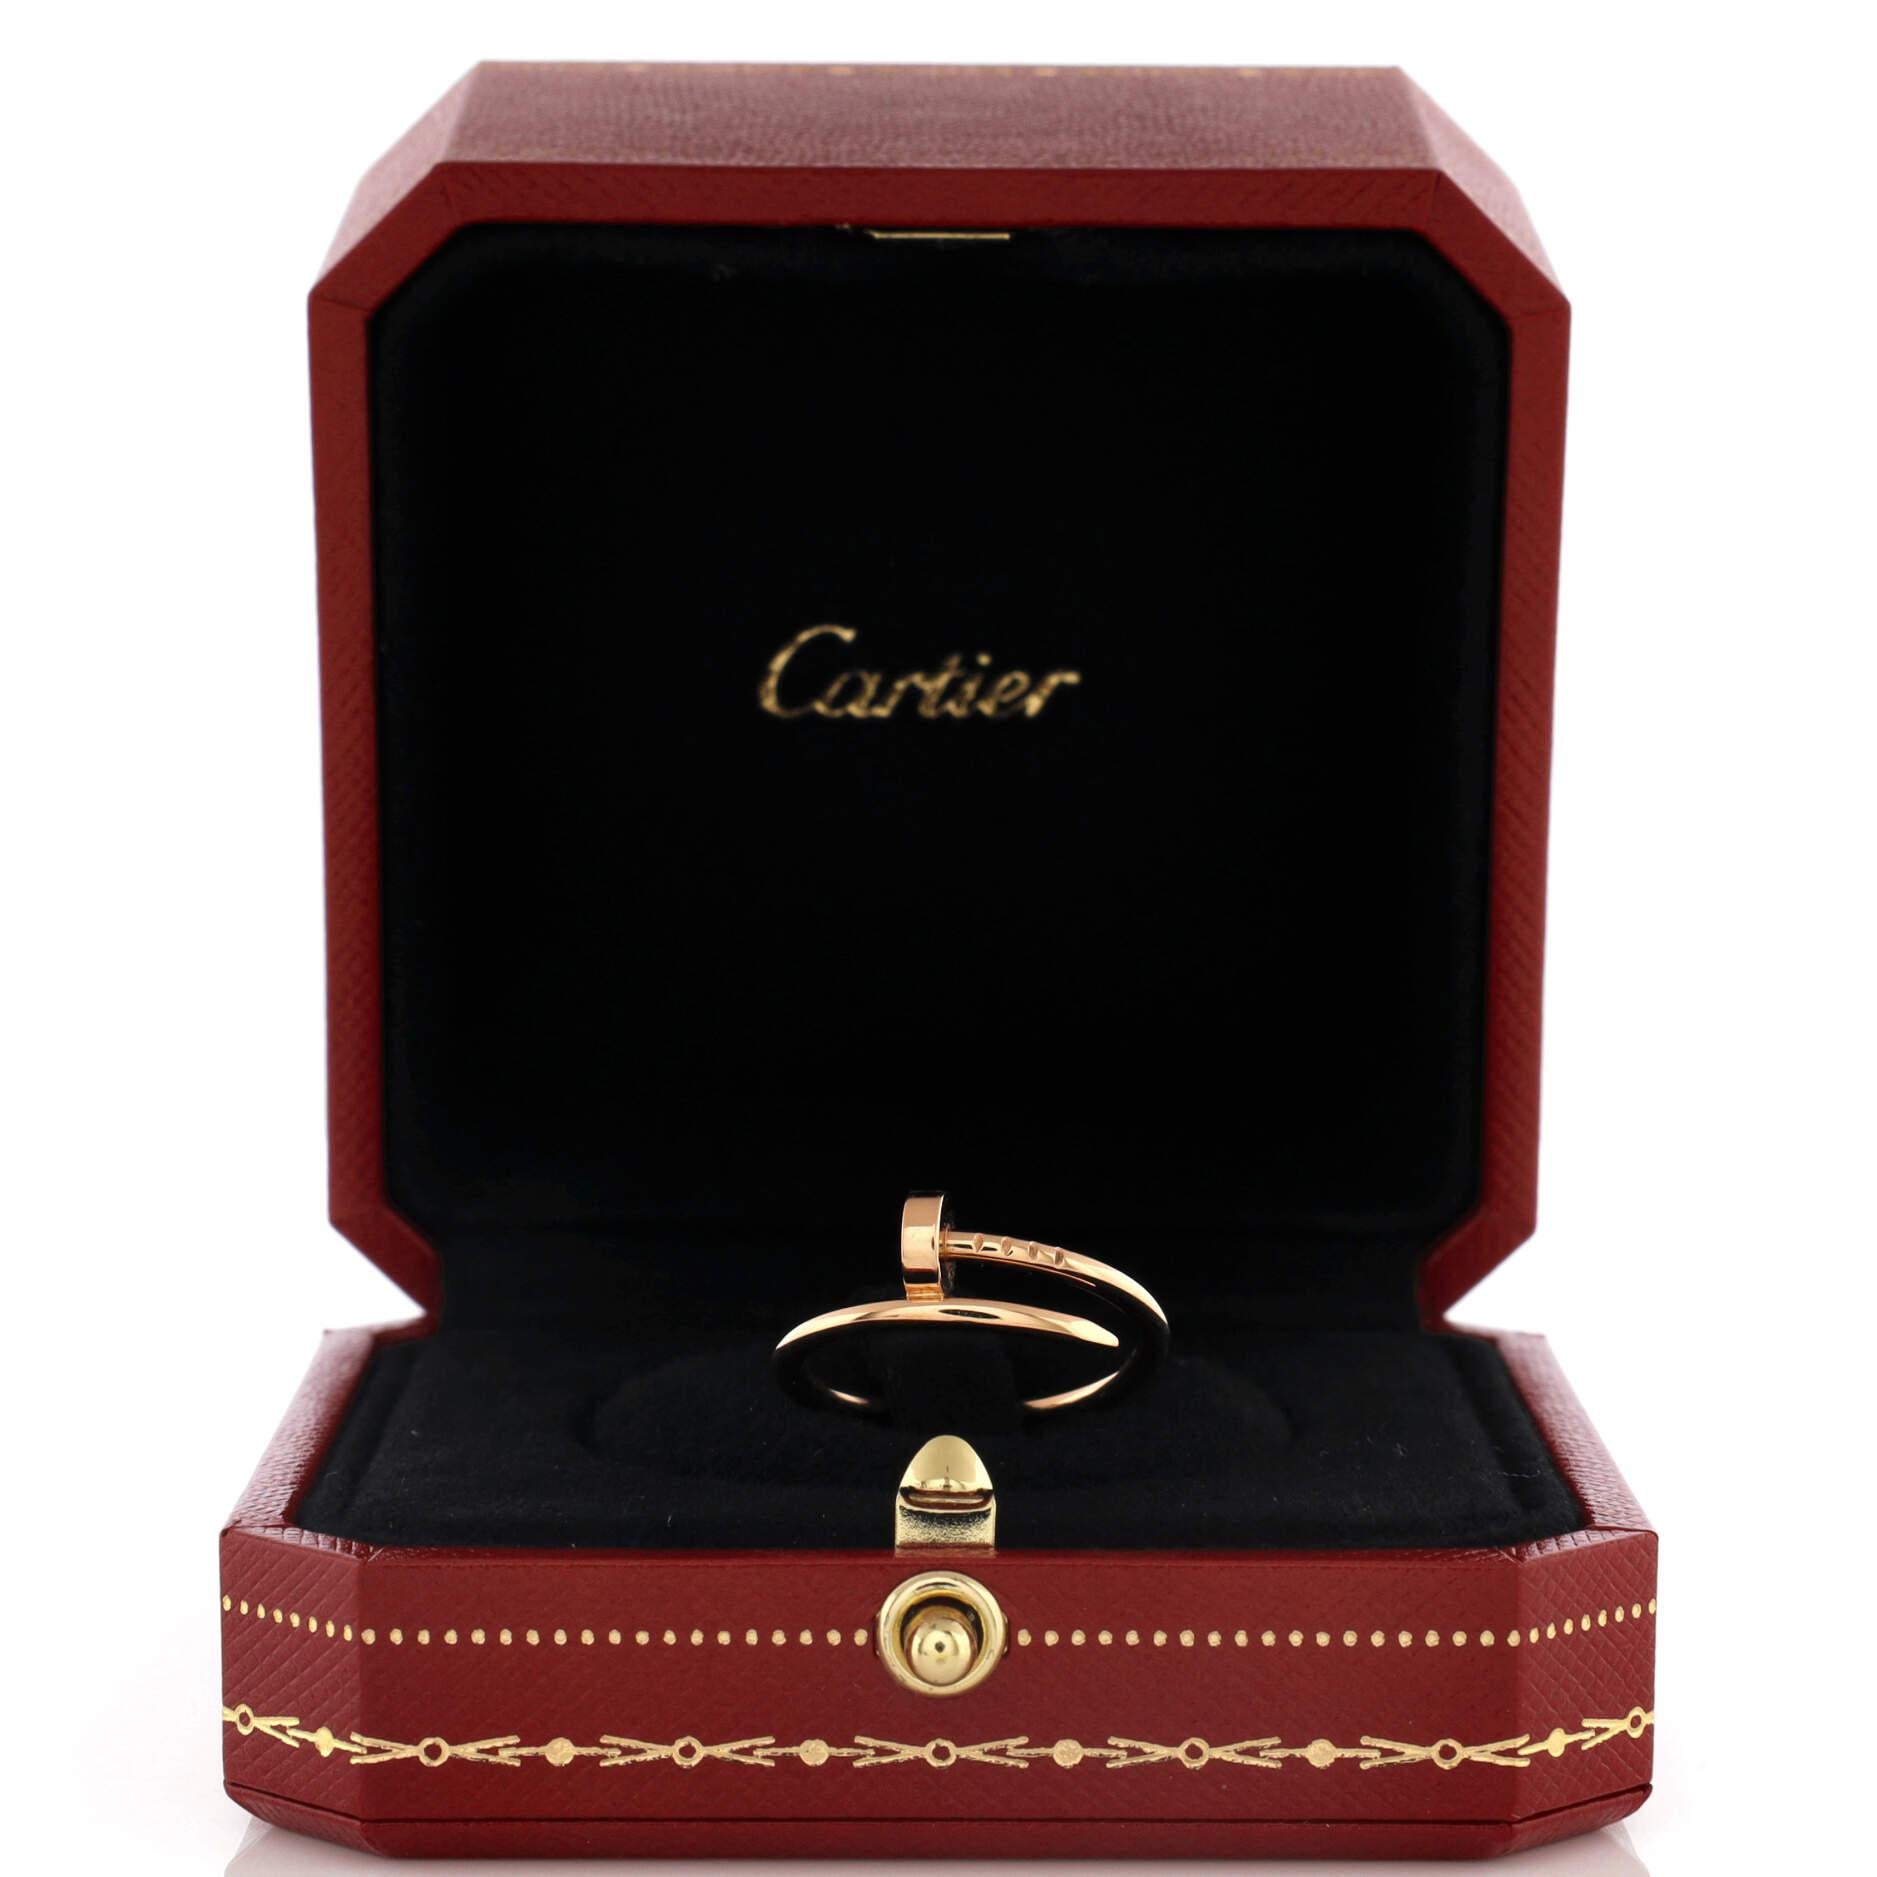 Condition: Great. Minor wear throughout.
Accessories: No Accessories
Measurements: Size: 9 - 60, Width: 1.80 mm
Designer: Cartier
Model: Juste un Clou Ring 18K Rose Gold Small
Exterior Color: Rose Gold
Item Number: 212042/3